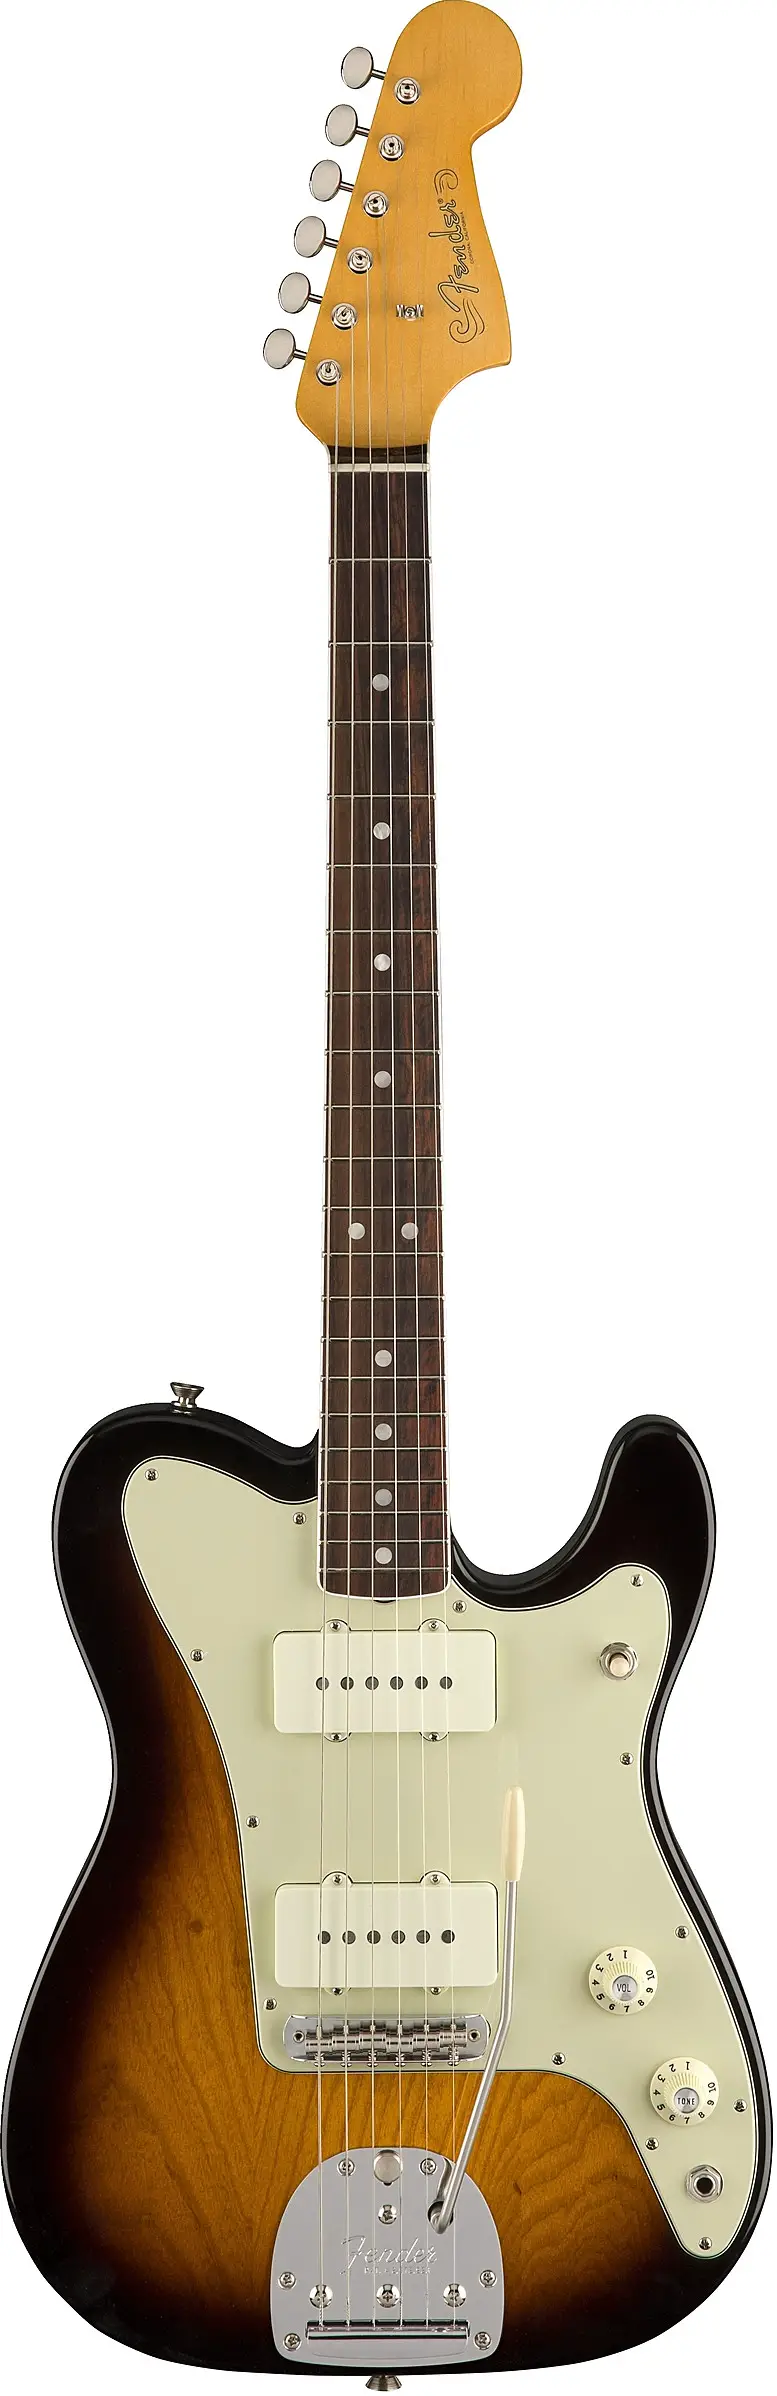 2018 Limited Edition Jazz-Tele by Fender